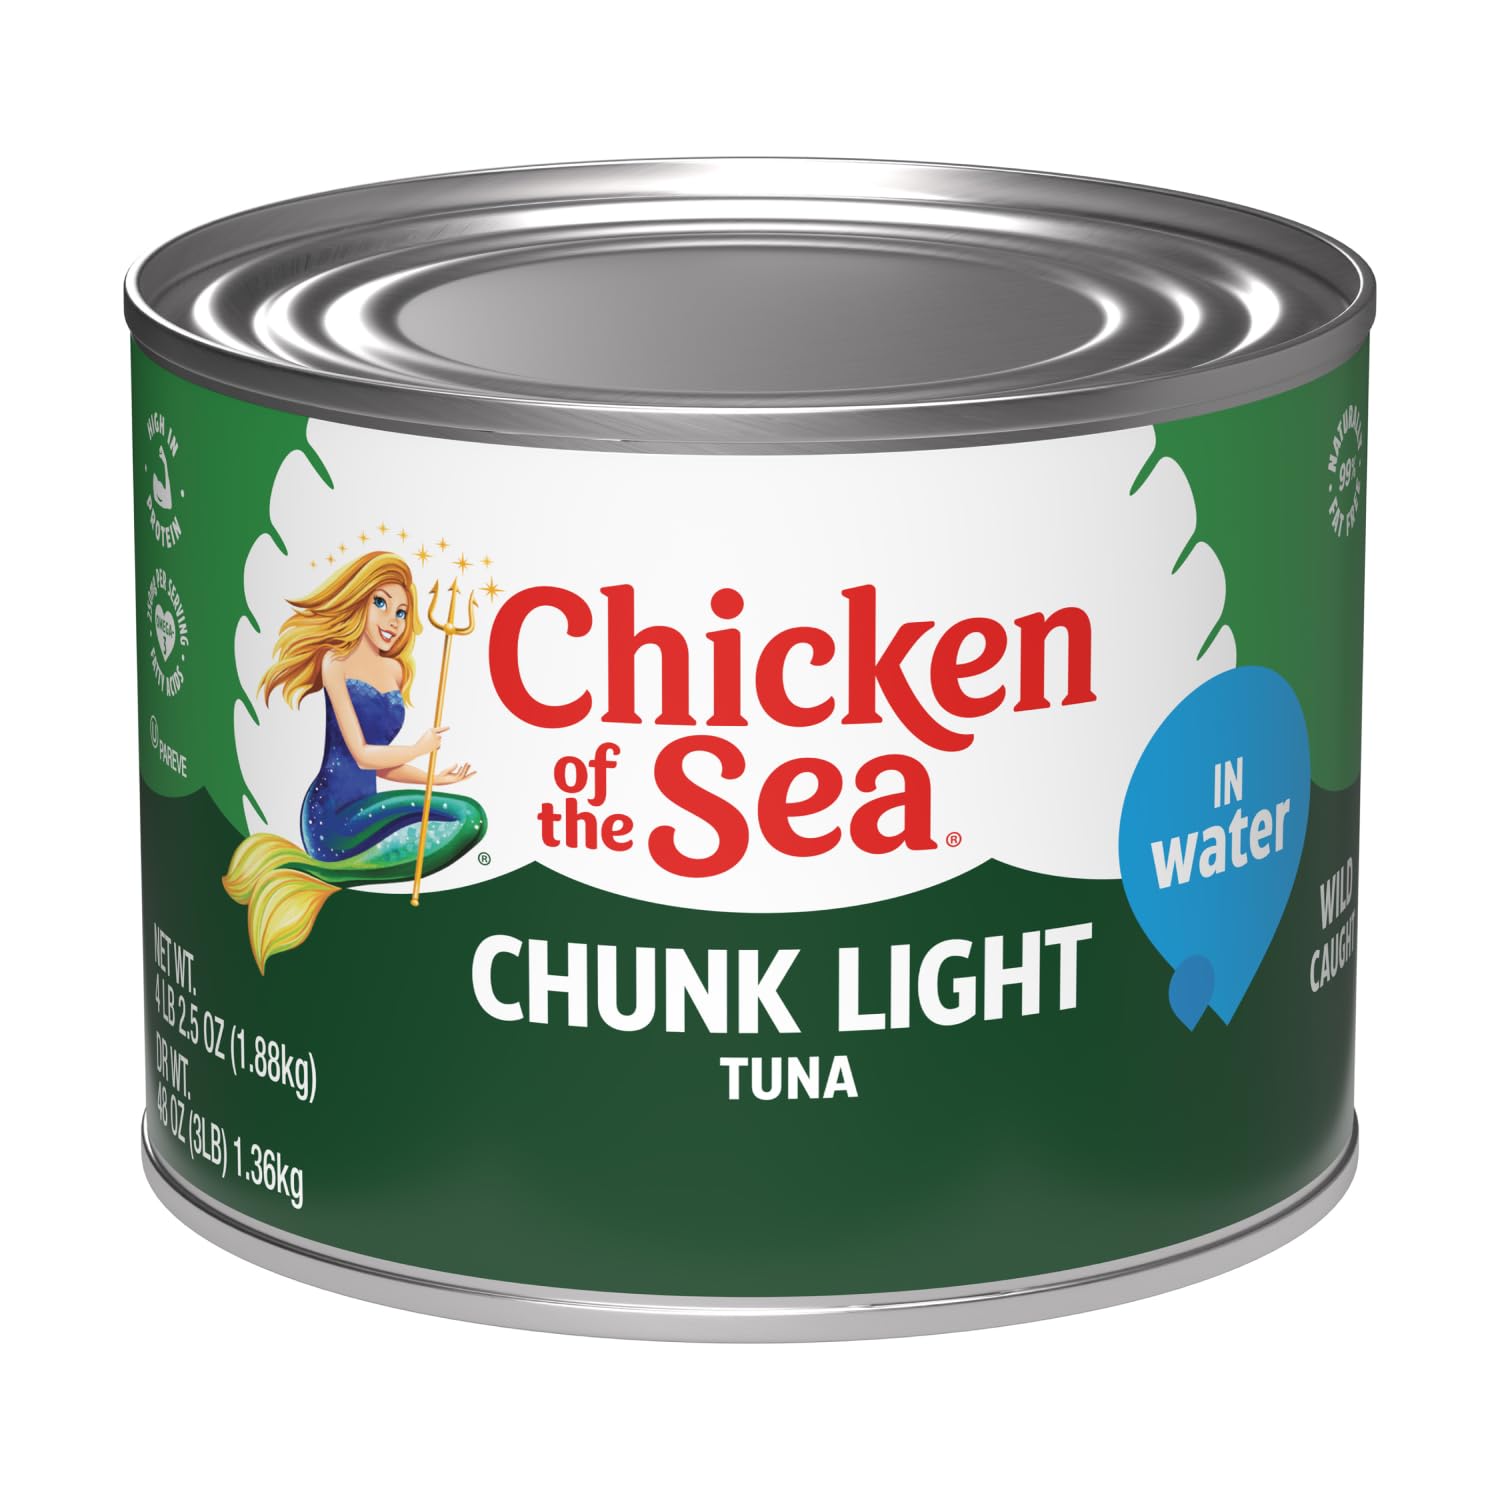 Chicken of the Sea Chunk Light Tuna in Water, Wild Caught Tuna, 66.5-Ounce Can (Pack of 1)